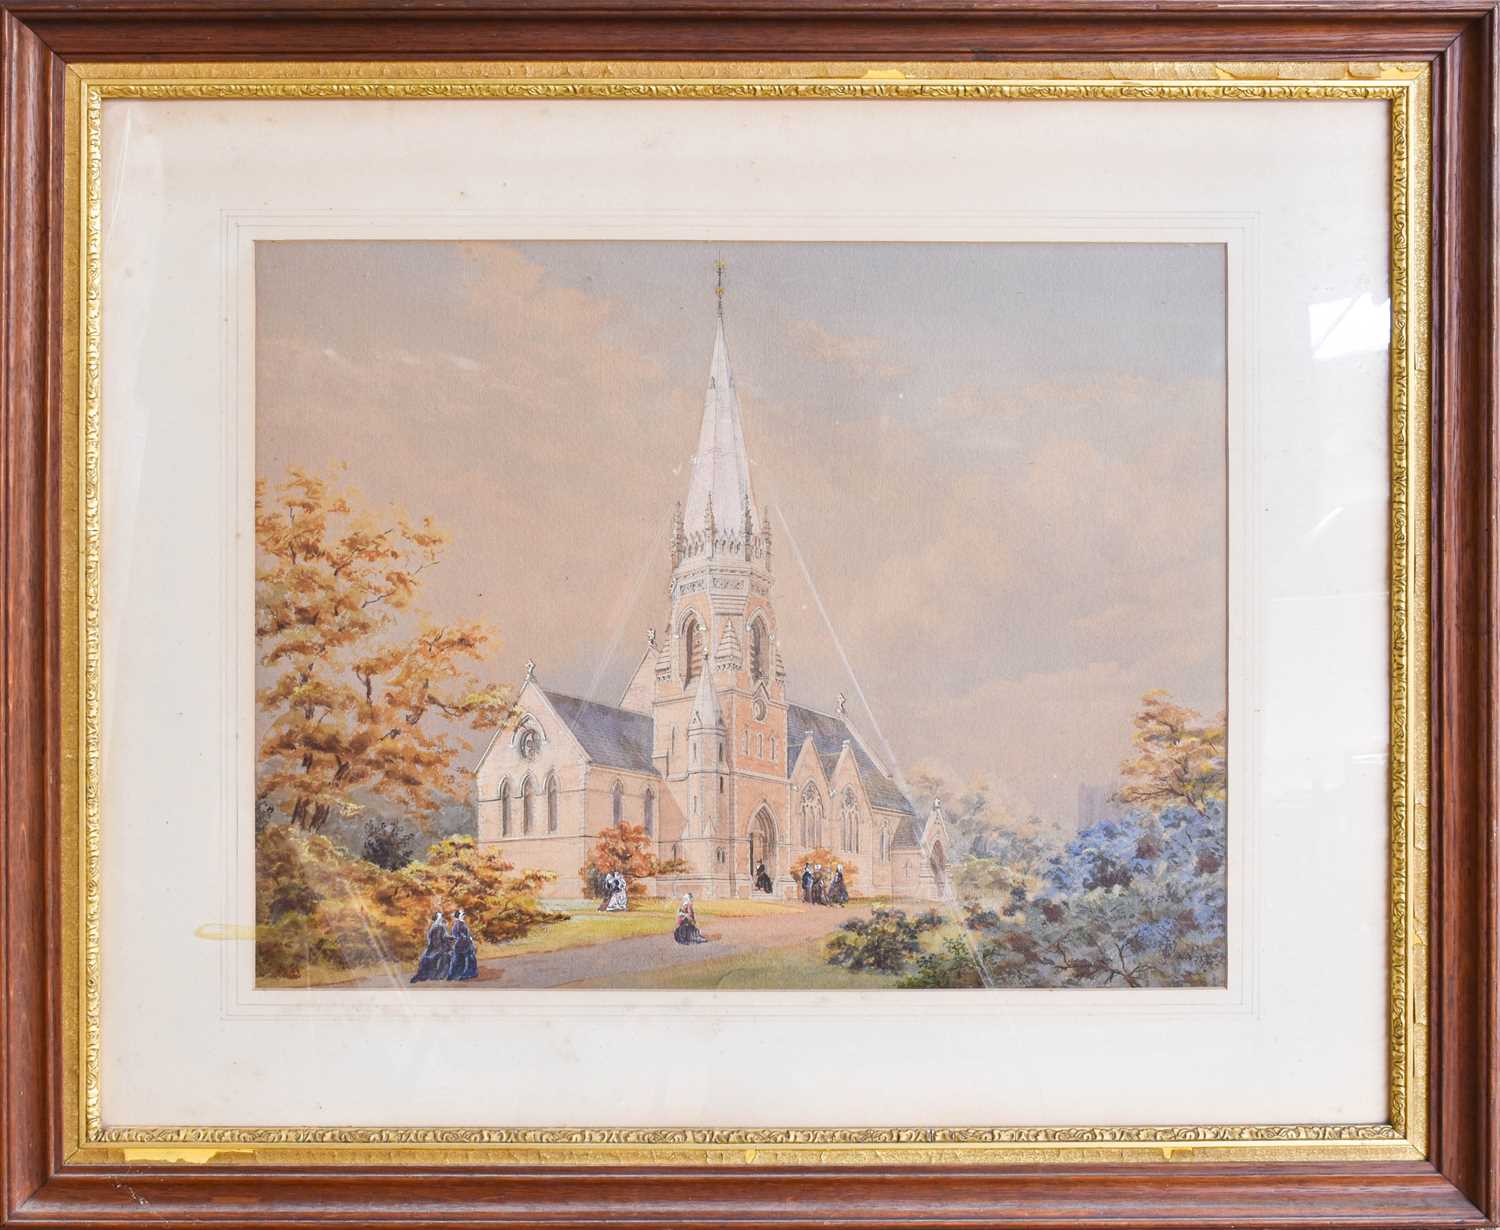 Harold Pye (20th Century) "Priory Church from Woldgate, Bridlington" Signed, inscribed and dated - Image 2 of 8